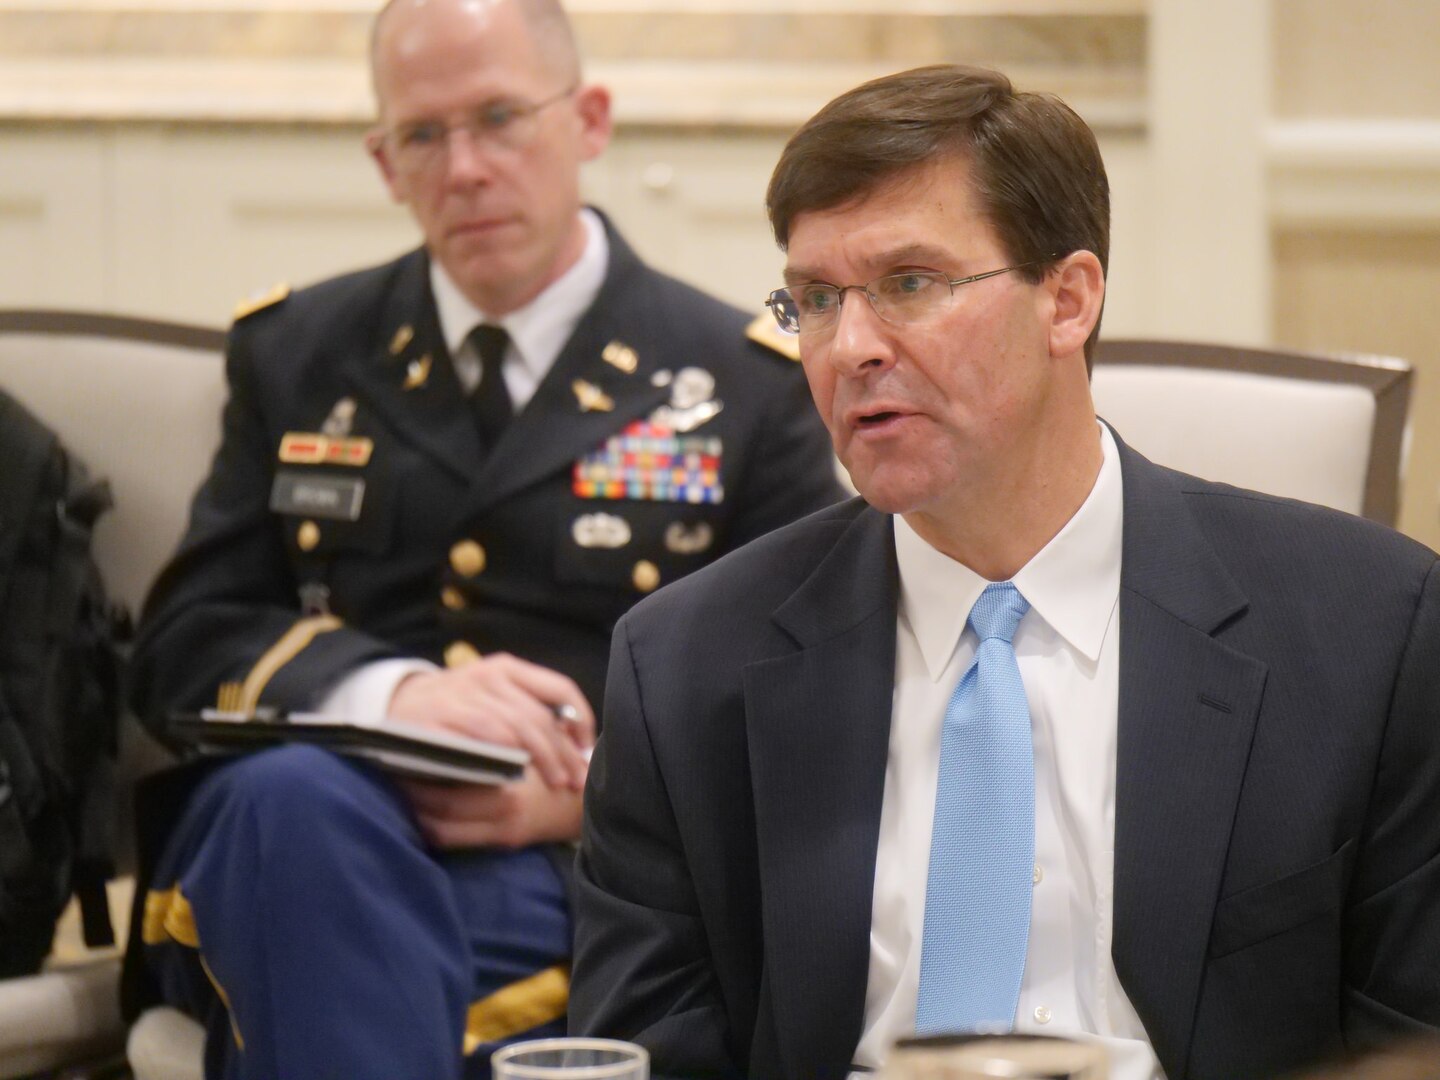 Secretary of the Army Dr. Mark T. Esper meets with journalists from the Defense Writers Group, an association of news outlets with reporters that cover national security issues, at the Fairmont Hotel Aug. 29.